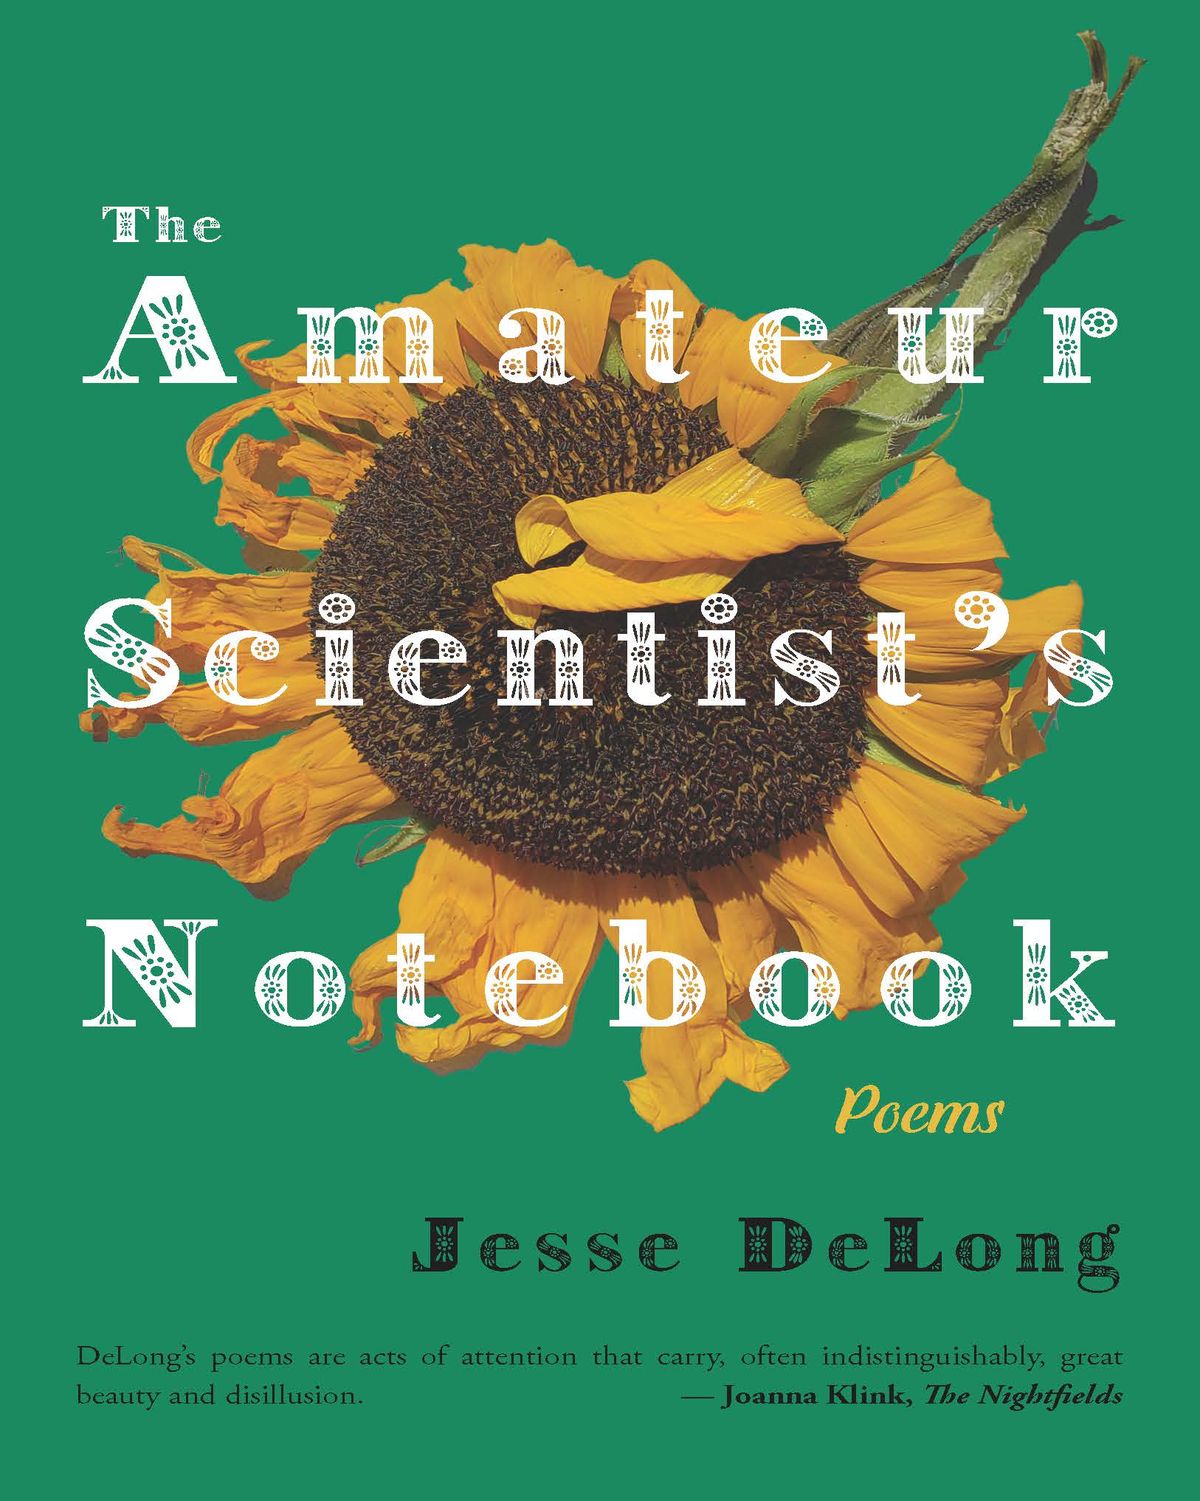 “The Amateur Scientist’s Notebook” by Jesse DeLong  (Courtesy)